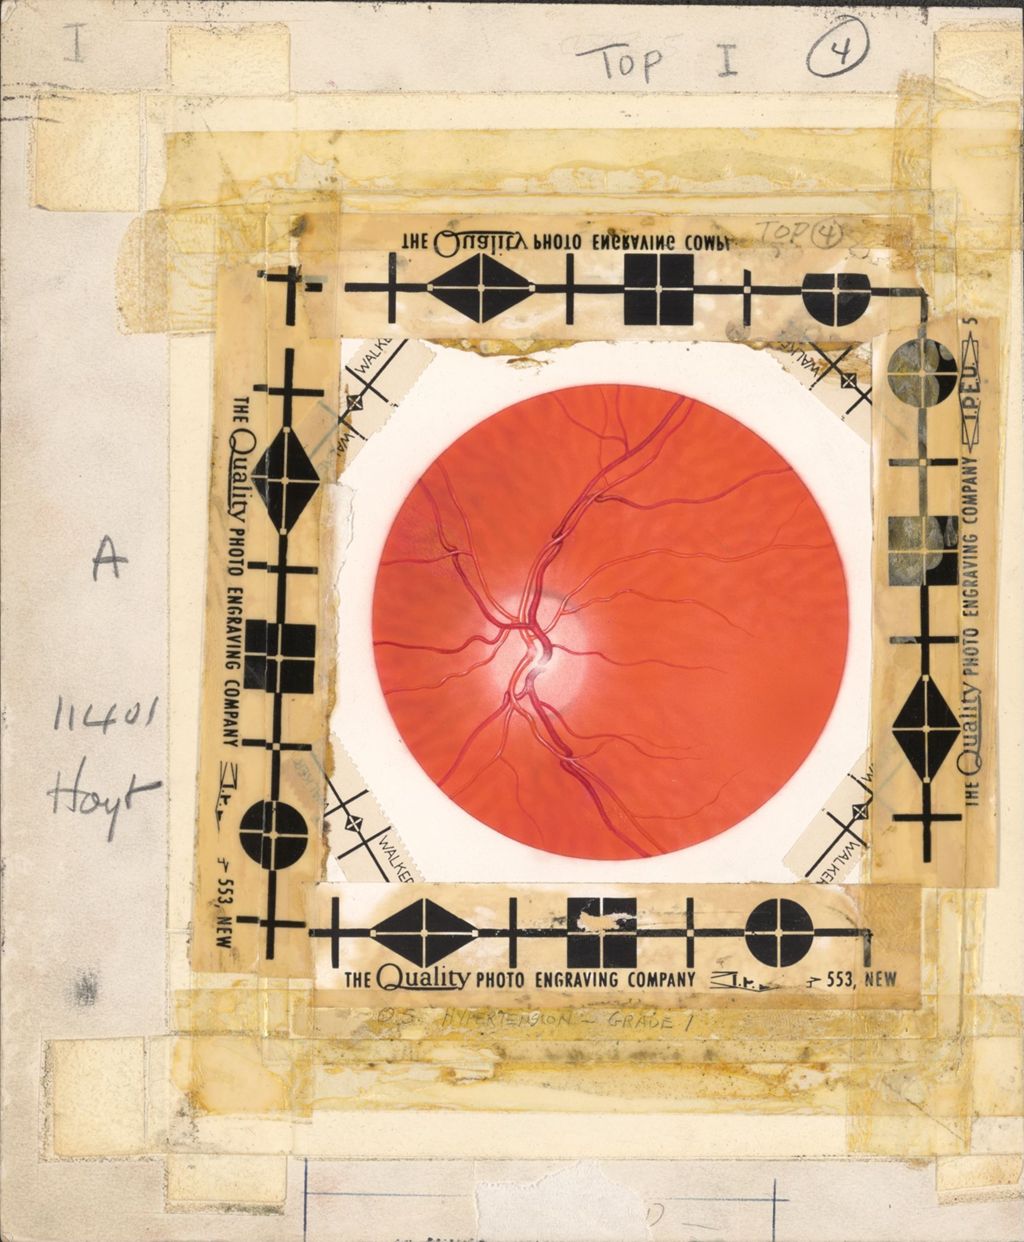 Miniature of Hypertension, Grade I, Artwork of veins, possibly fundus within eye